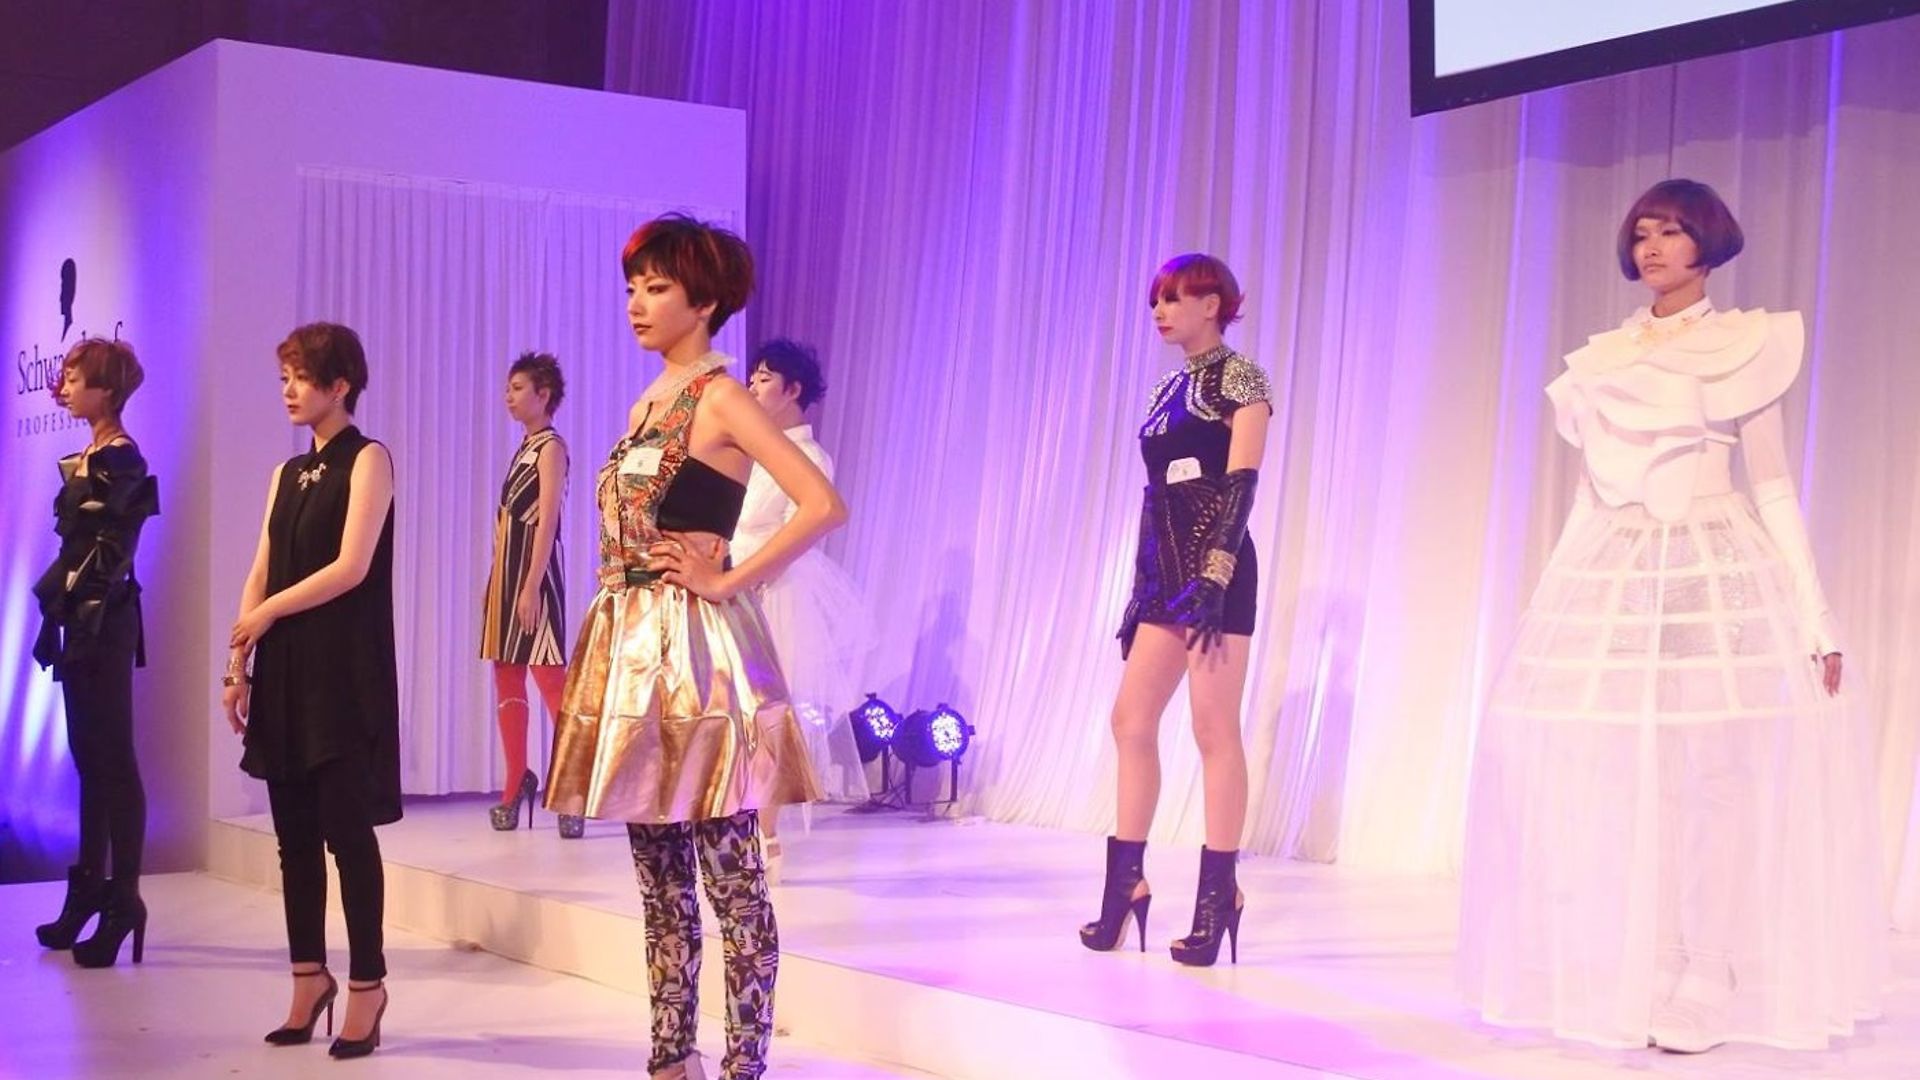 The models presenting the hairstyles